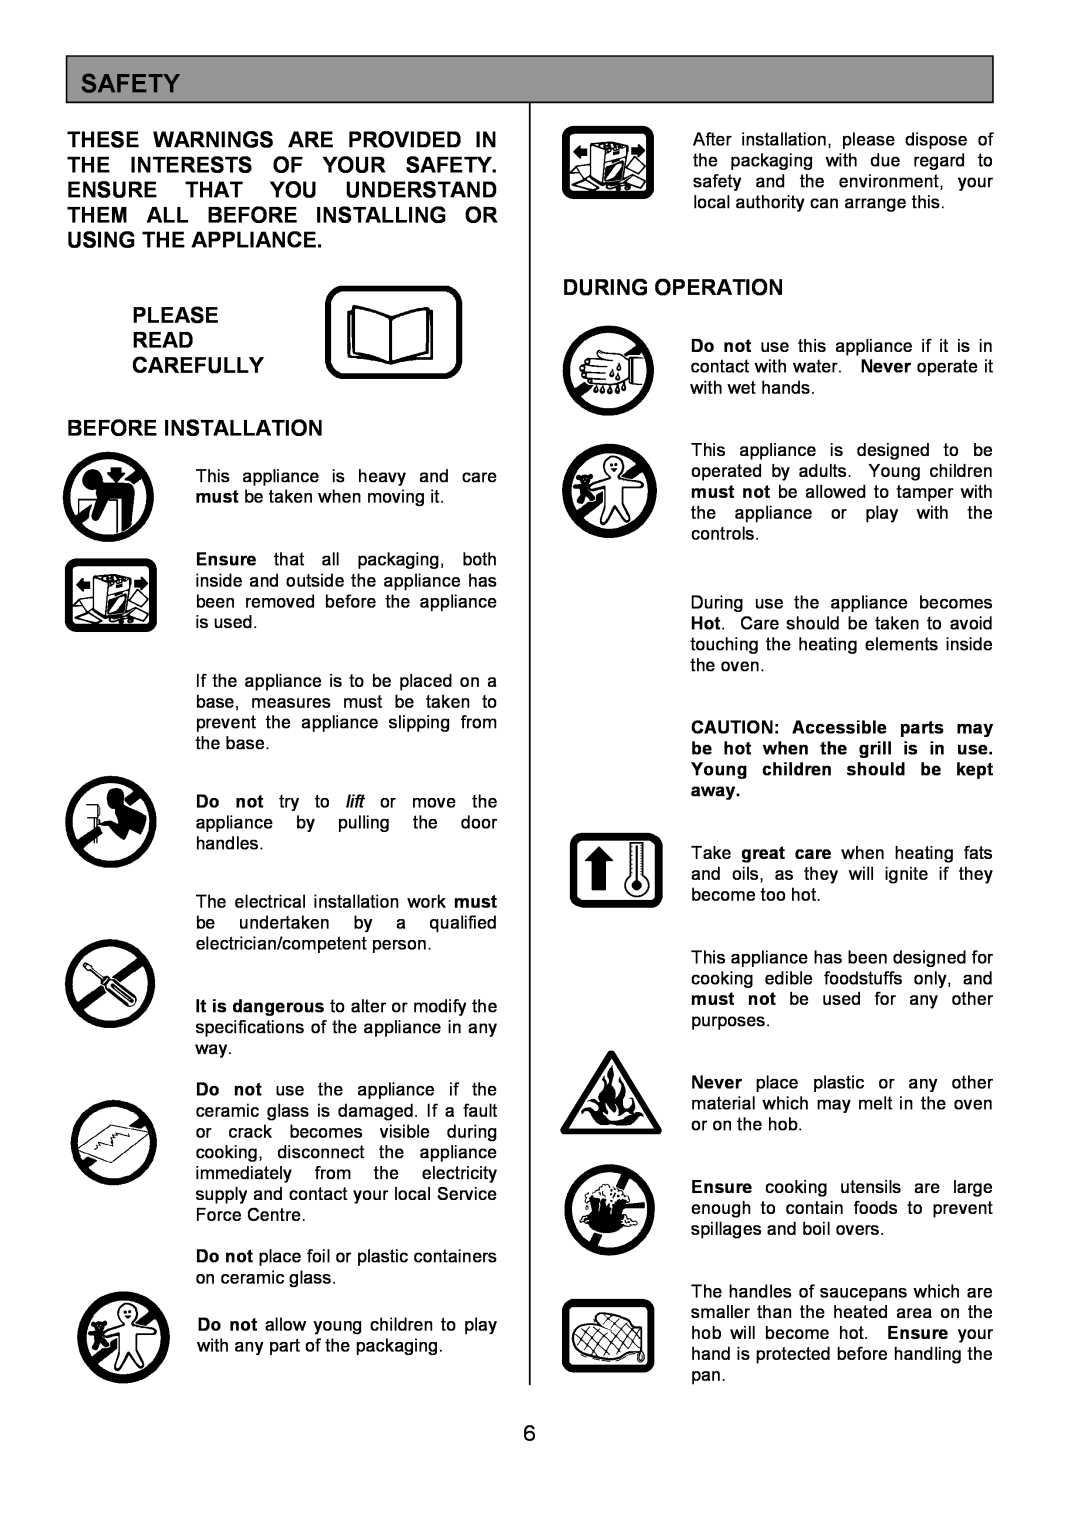 Tricity Bendix SI505 installation instructions Safety, Please Read Carefully Before Installation, During Operation 